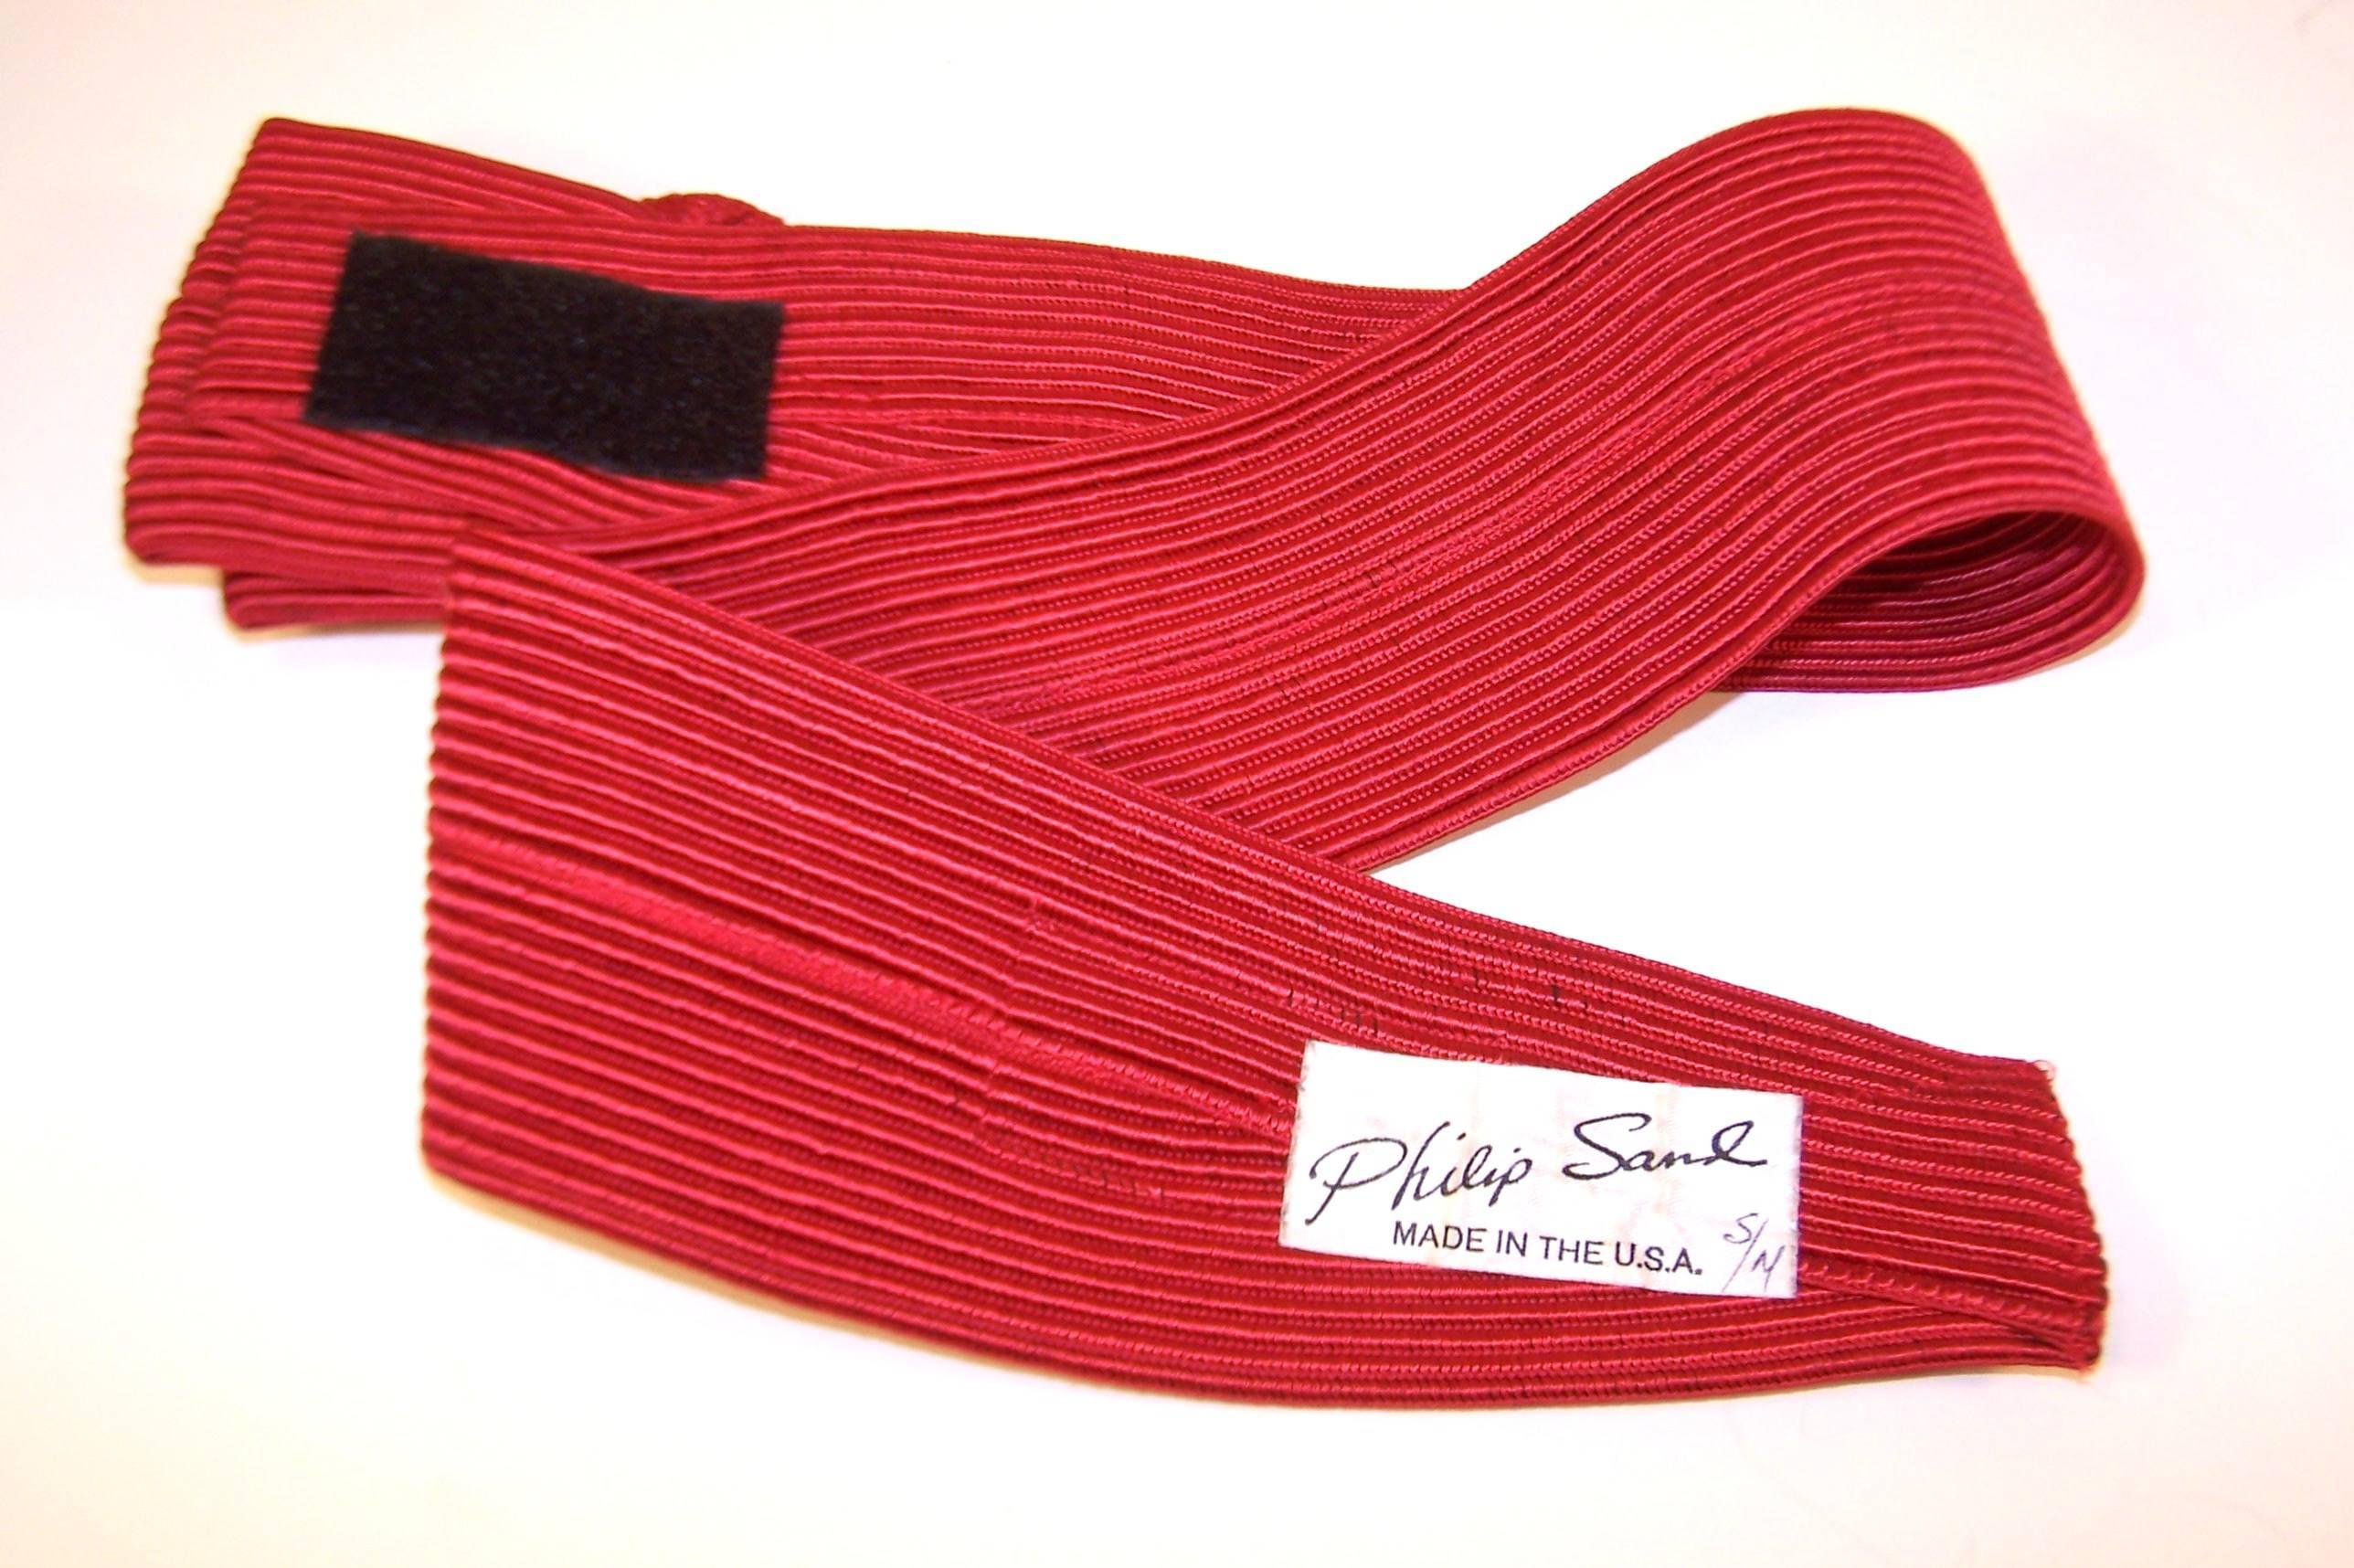 Waist Cinching 1980's Ruby Red Silk Corded Belt With Bow Buckle 3